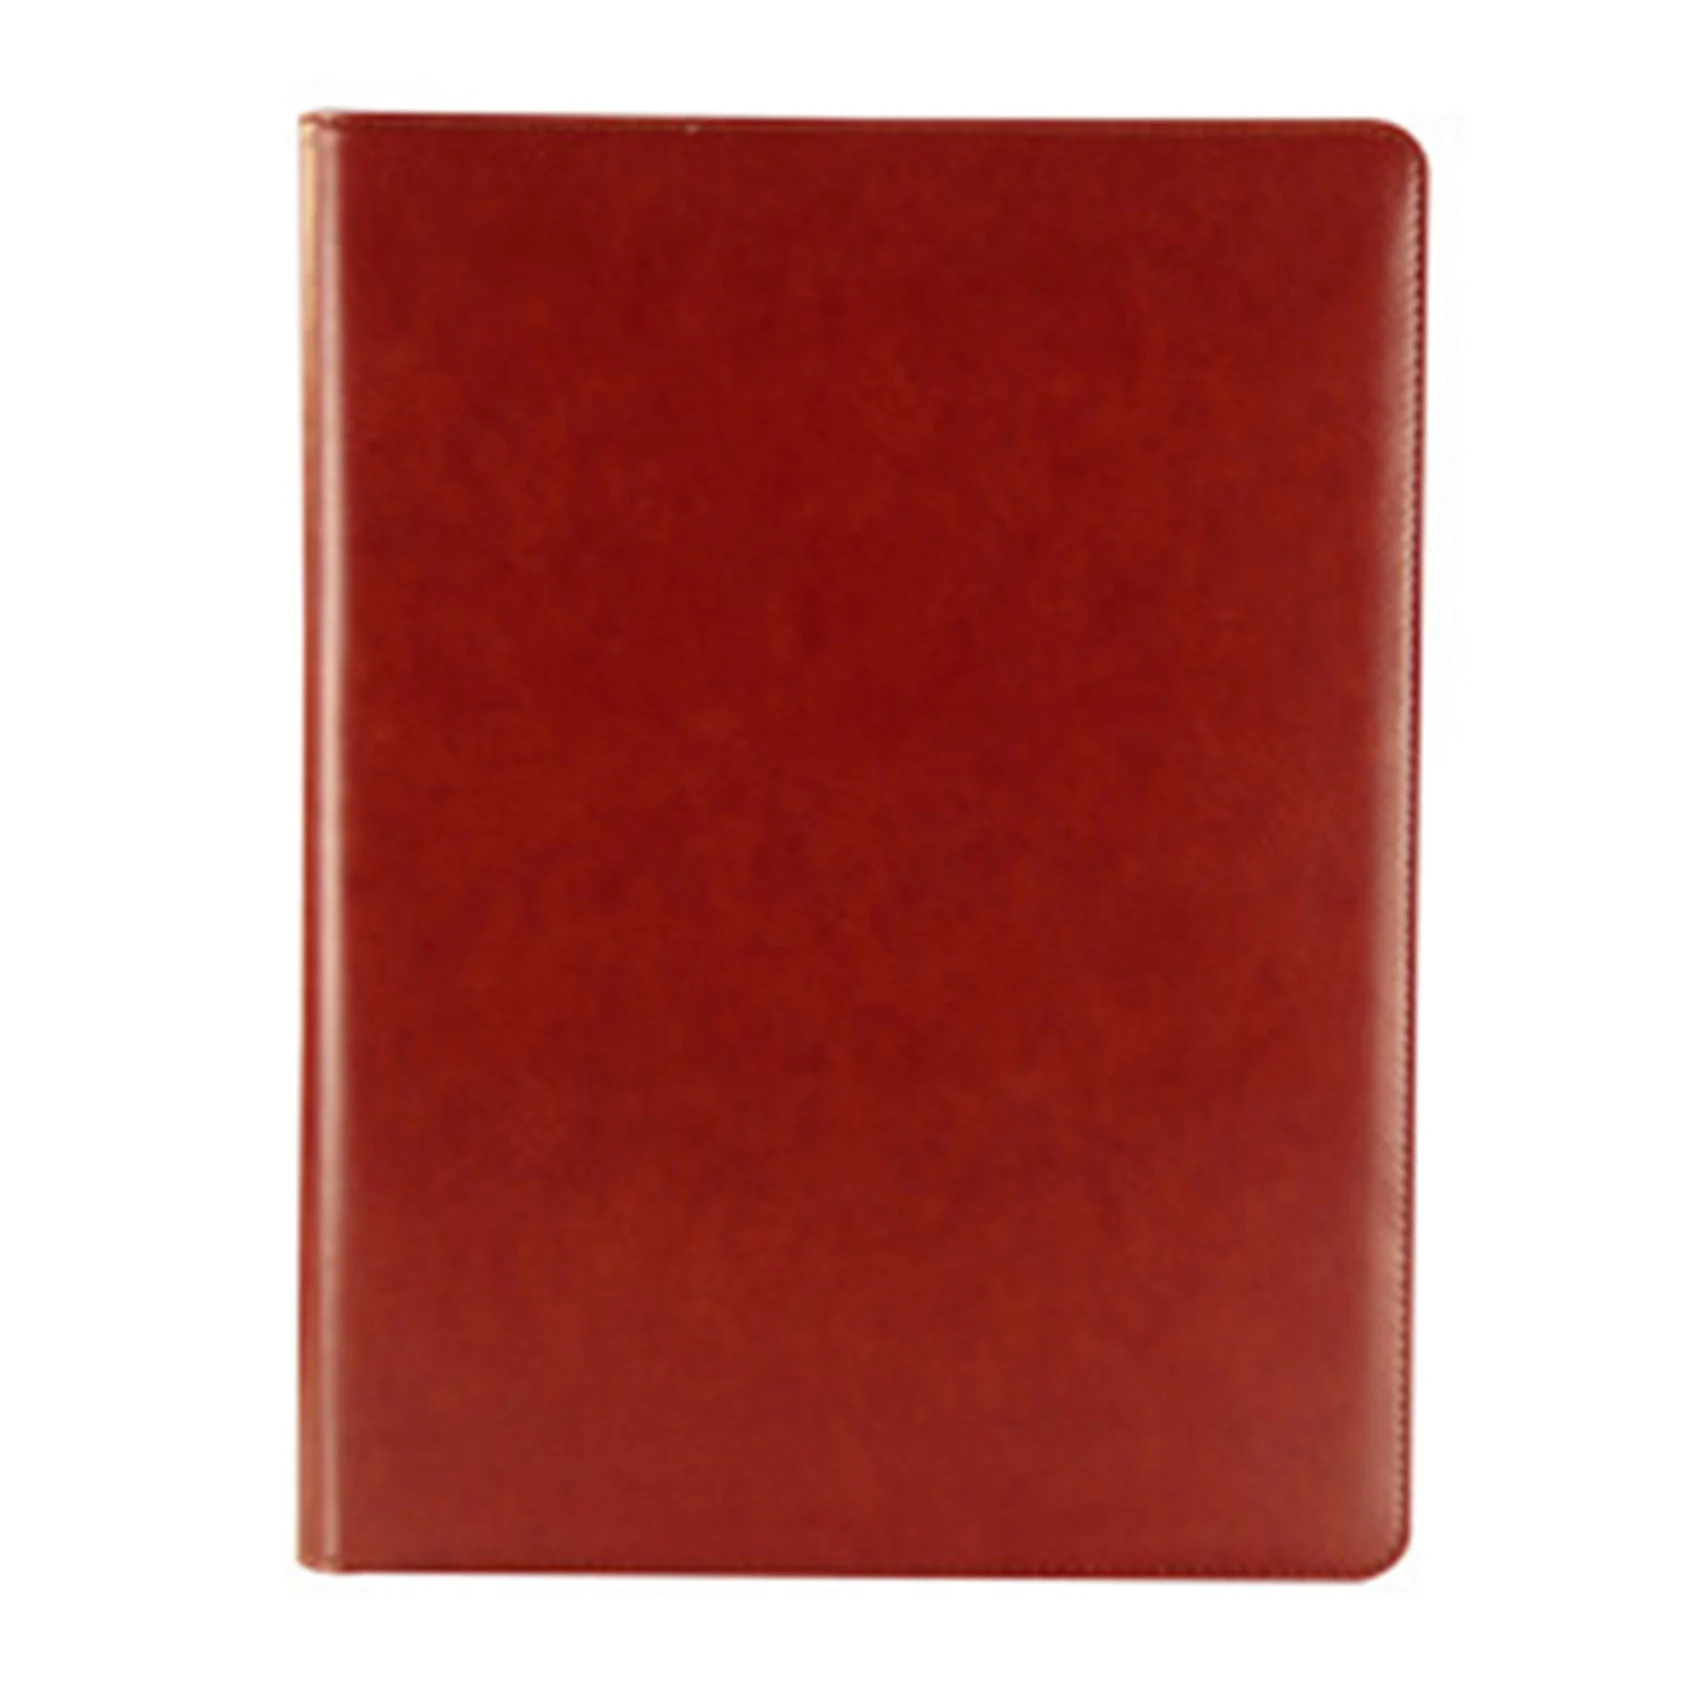 

A4 Folder with 12-Digit Calculator Binder Organizer Manager Office Document Pad PU Leather Folder Briefcase (Red-Brown)